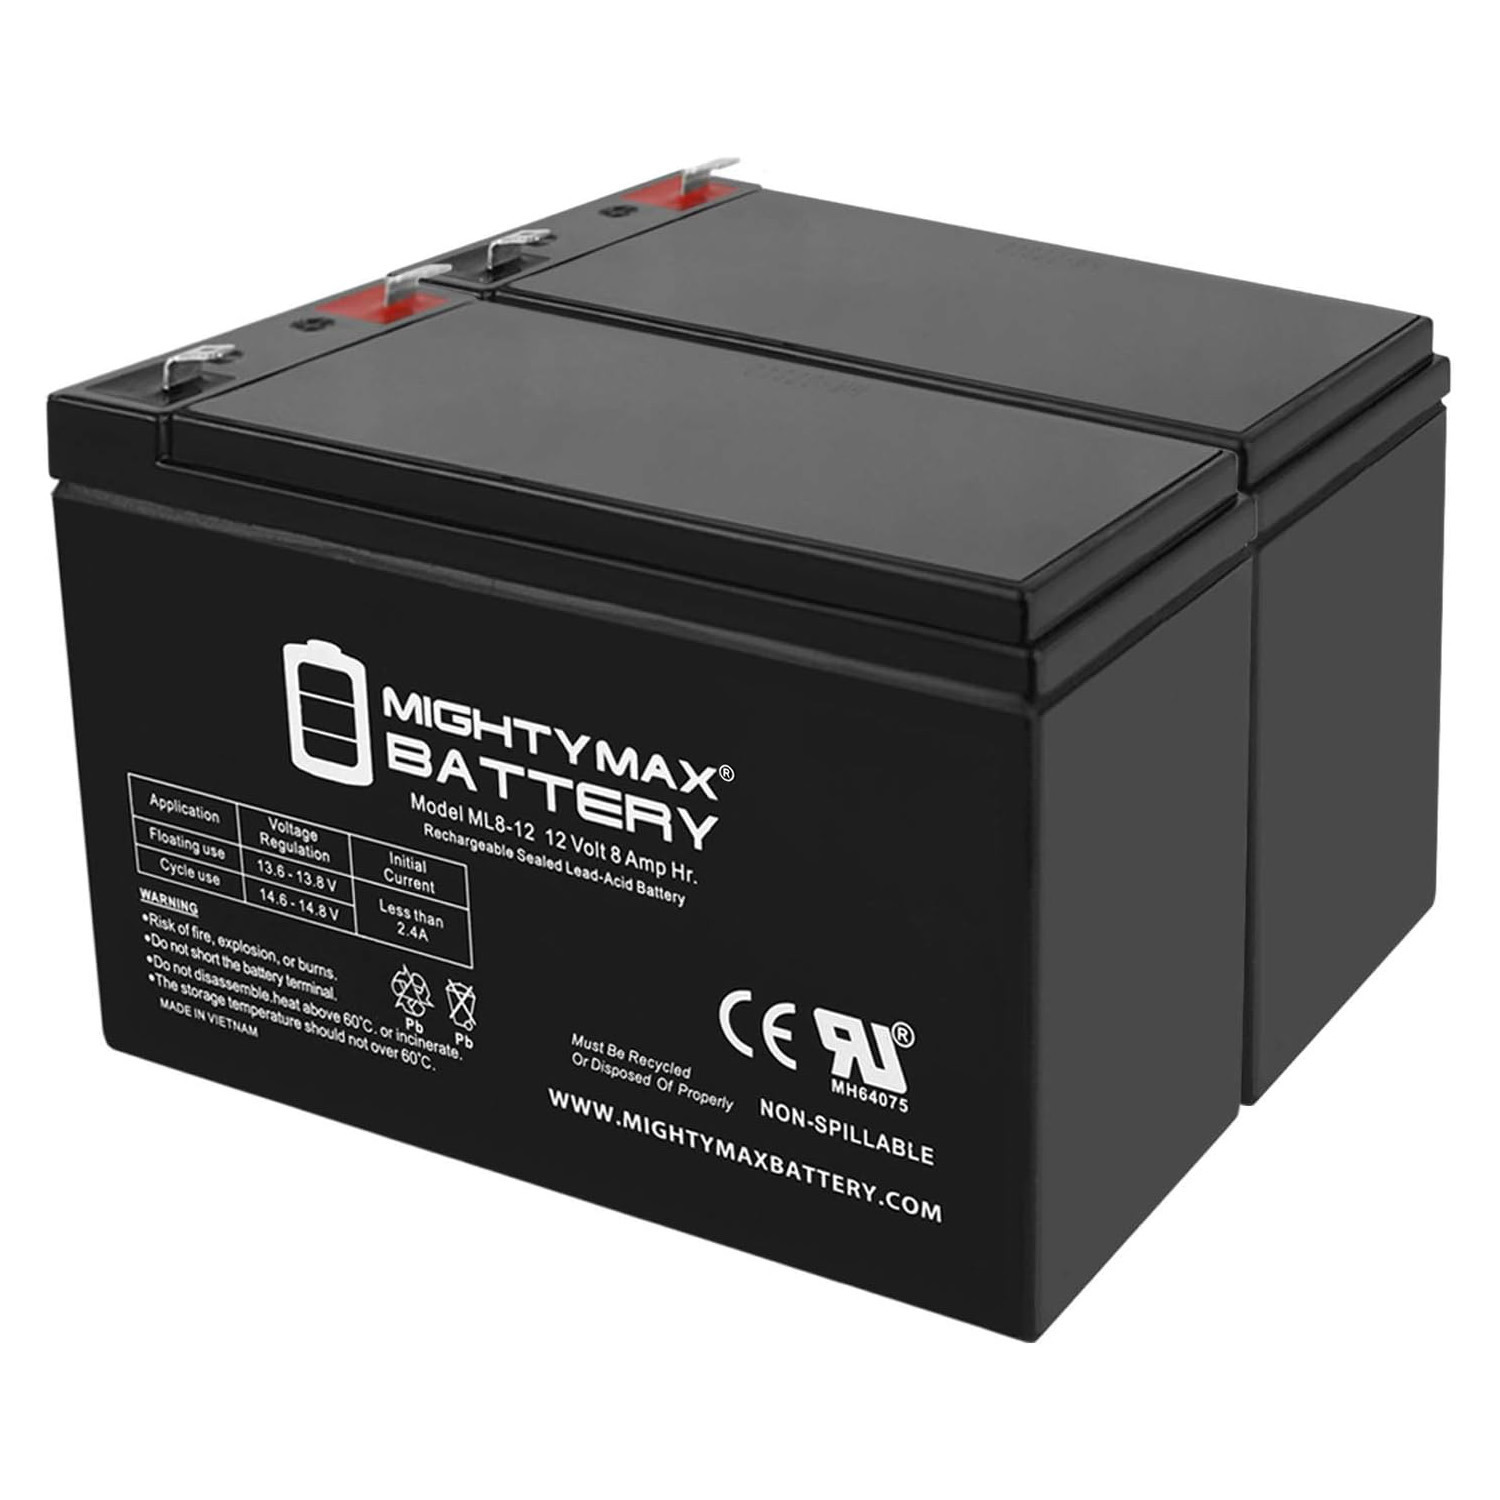 12V 8Ah Battery Replacement for Sola 310-750-A, B510-1250-E - 2 Pack